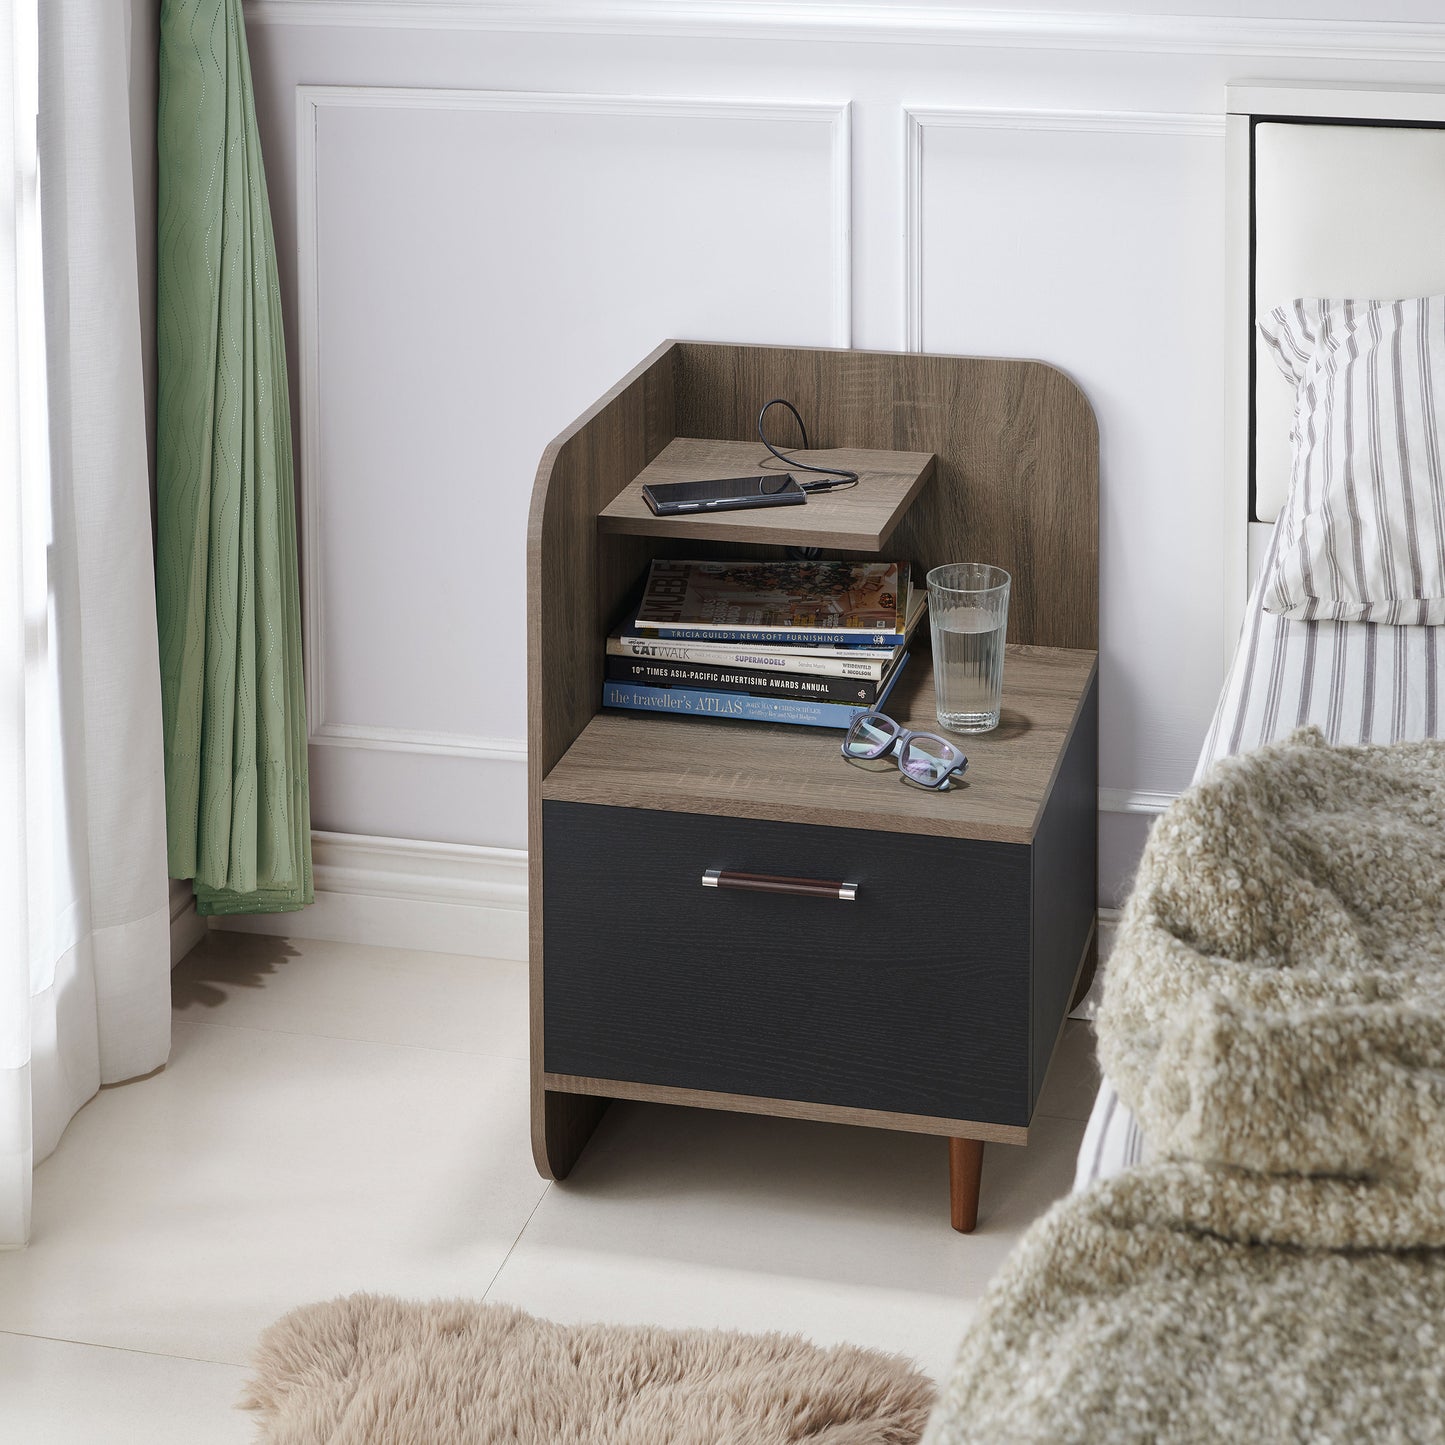 Left angled contemporary chestnut brown one-drawer nightstand with a mini shelf in a bedroom with accessories